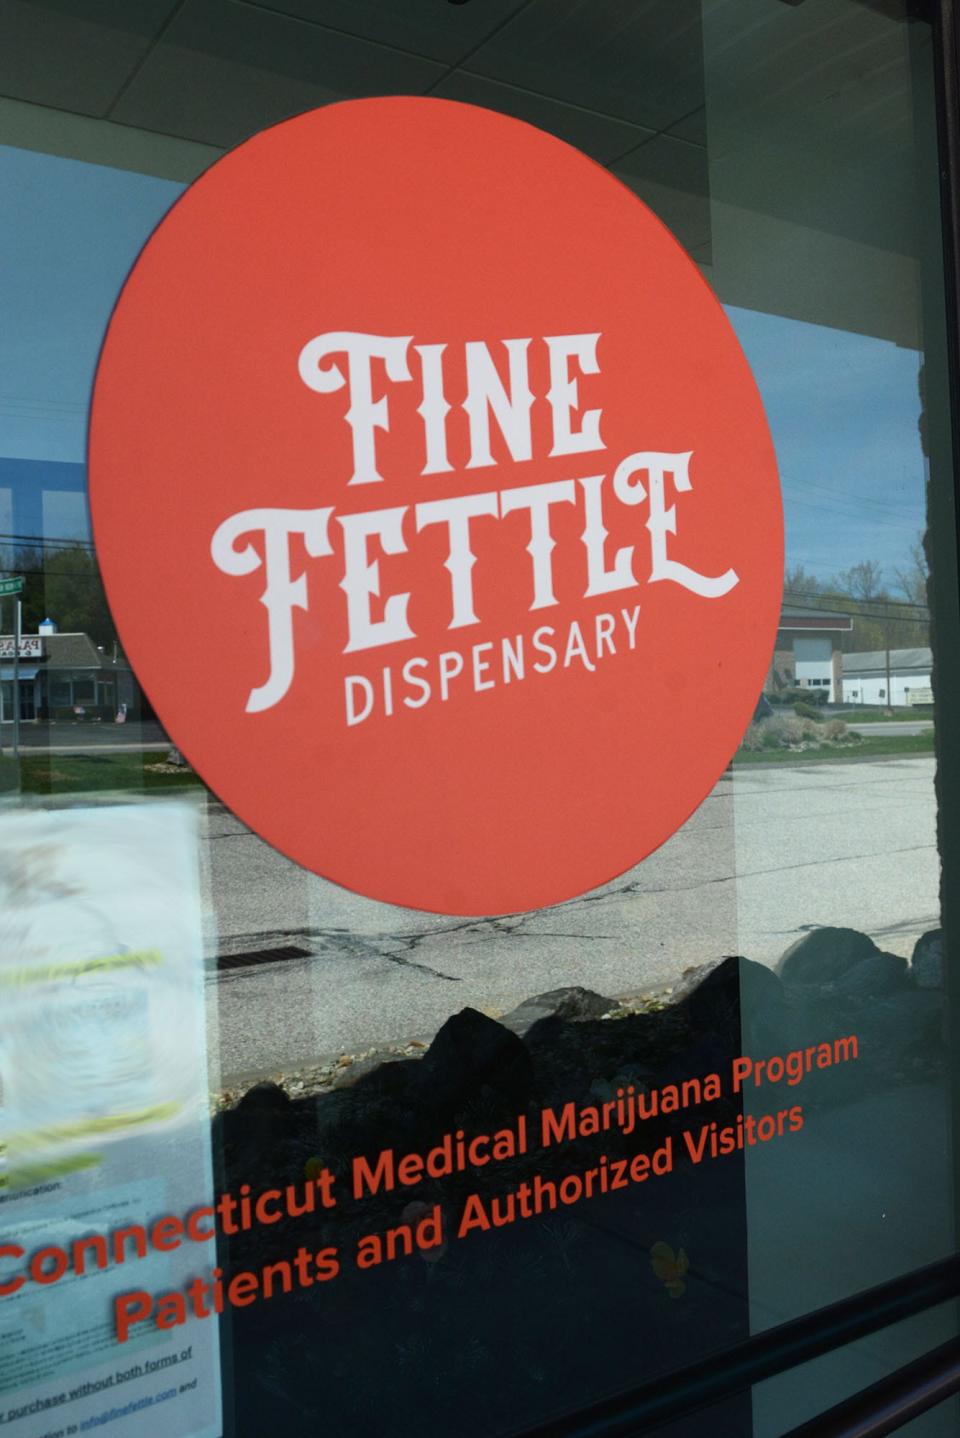 A sign at Fine Fettle, a medical marijuana dispensary in Willimantic Monday.